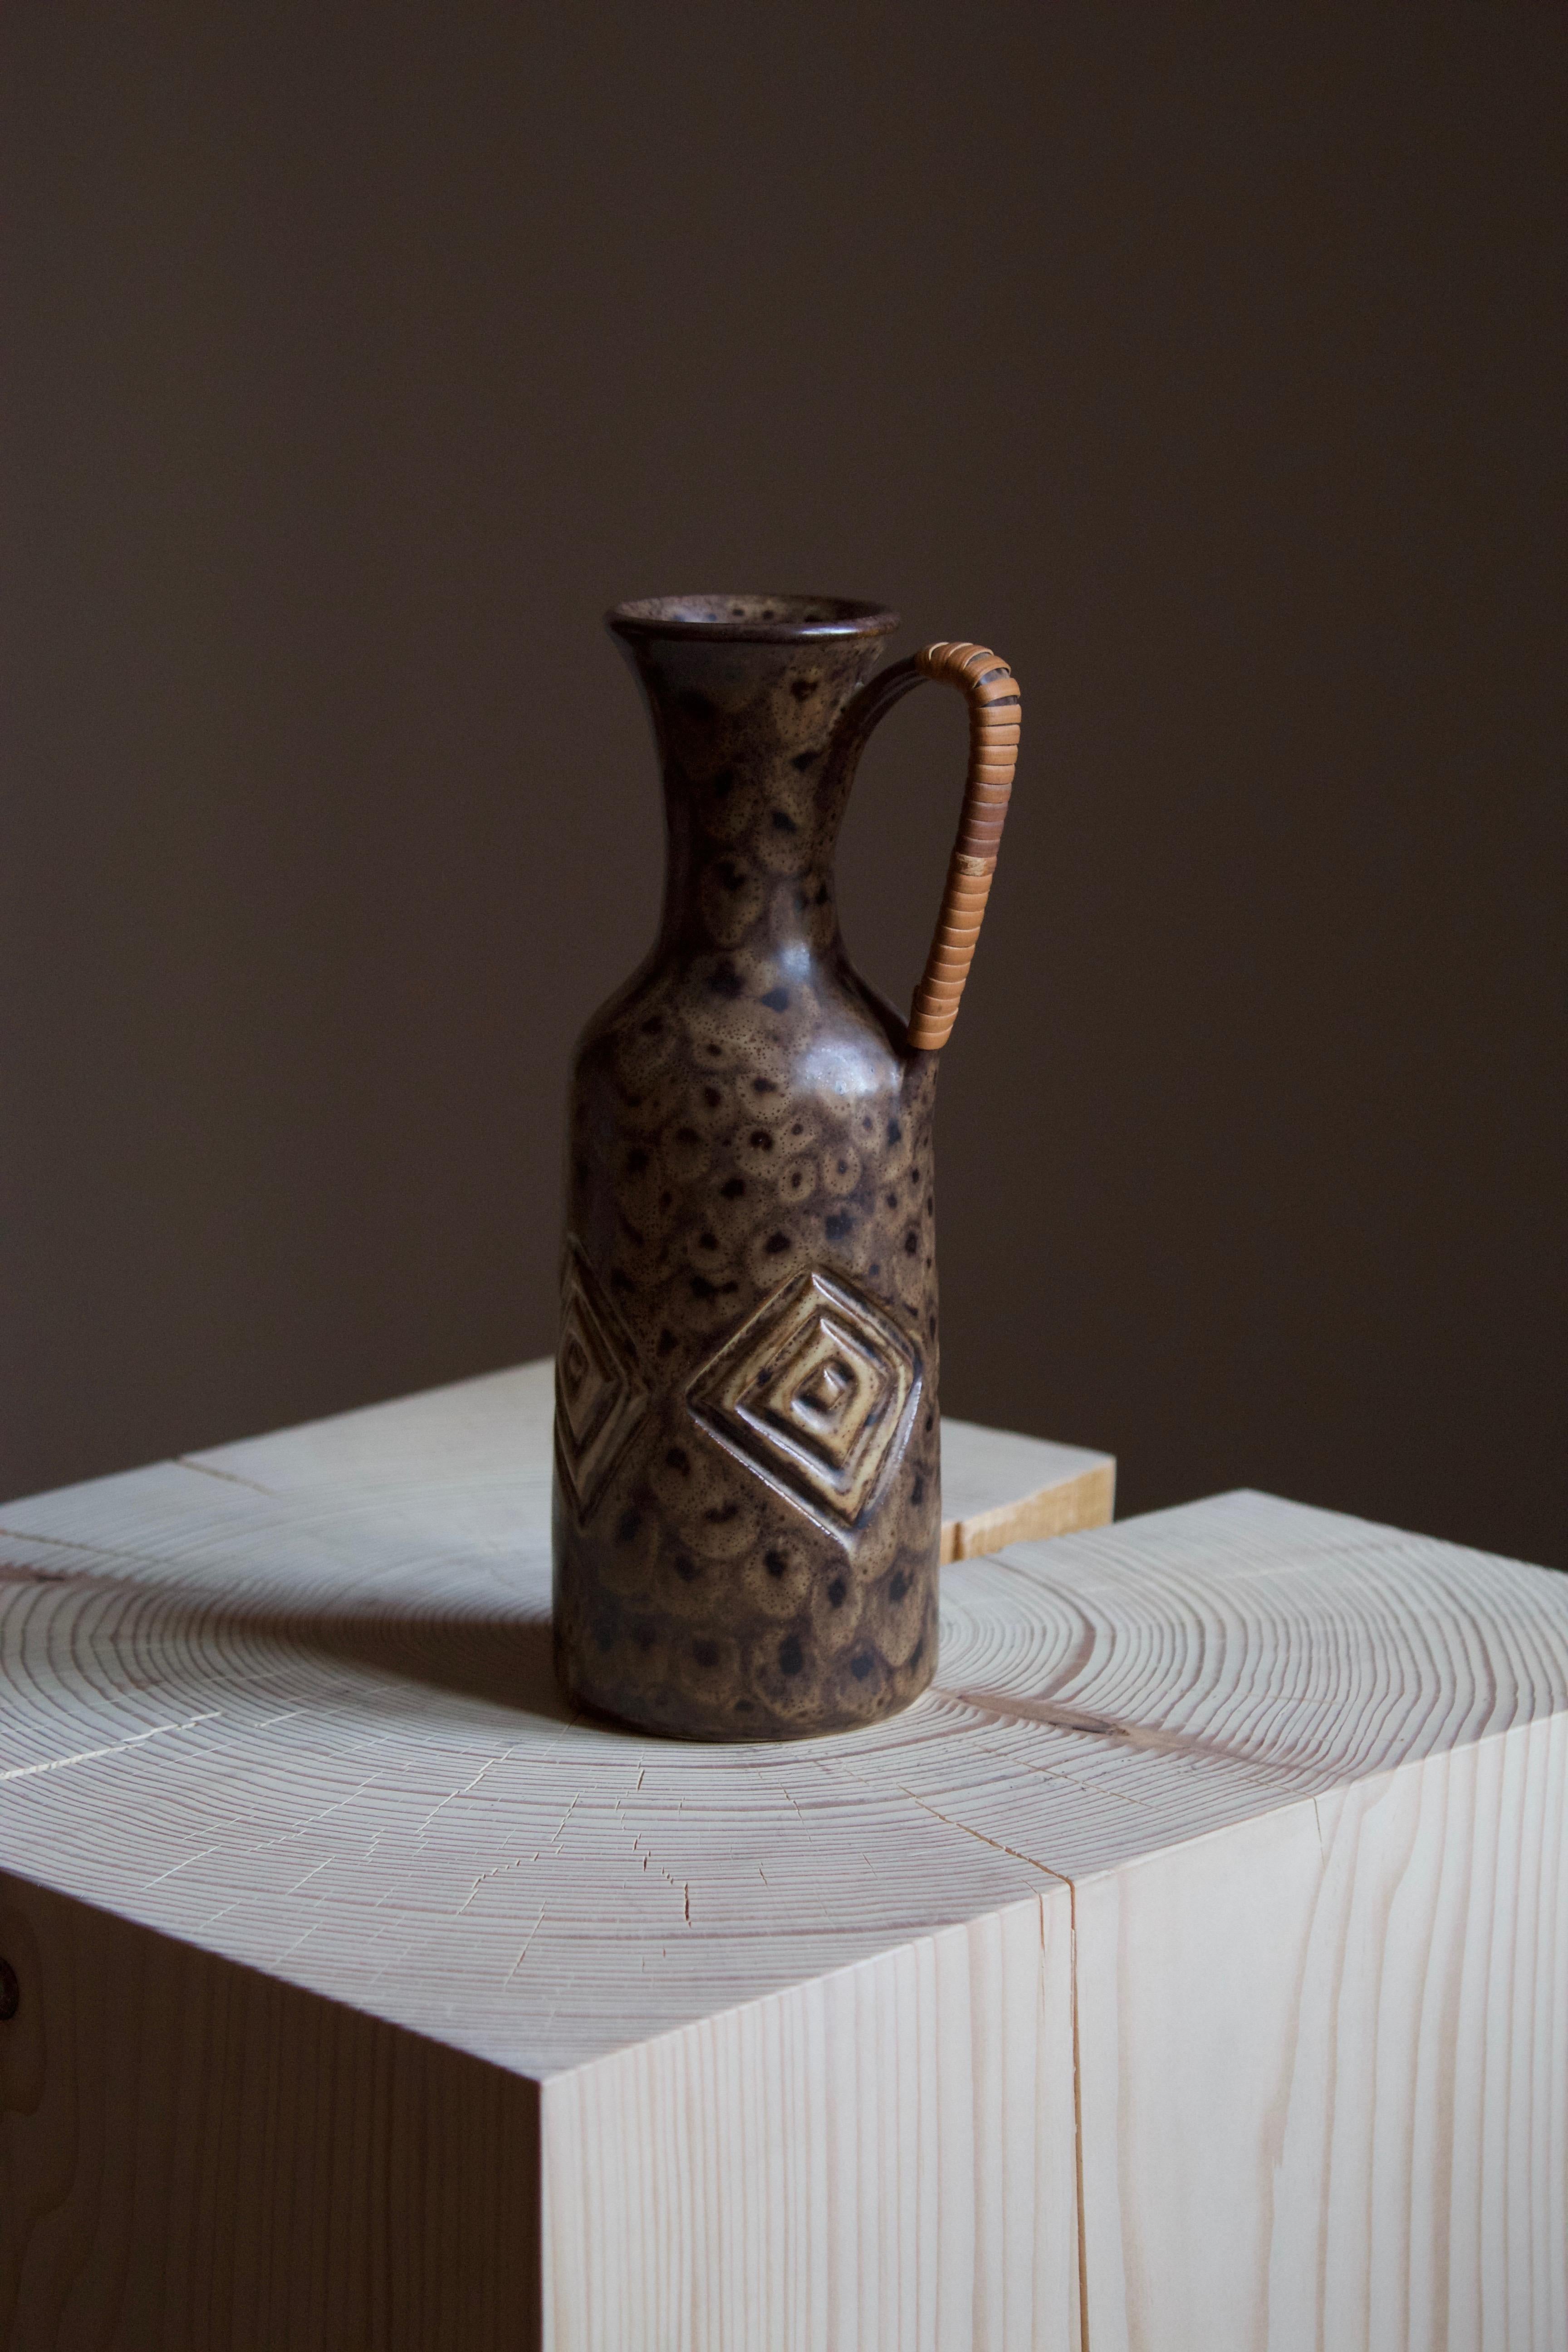 A small pitcher produced and designed by Løvemose, Denmark, 1960s. With makers stamp

Other ceramicists of the period include Axel Salto, Arne Bang, Carl-Harry Stålhane, and Berndt Friberg.